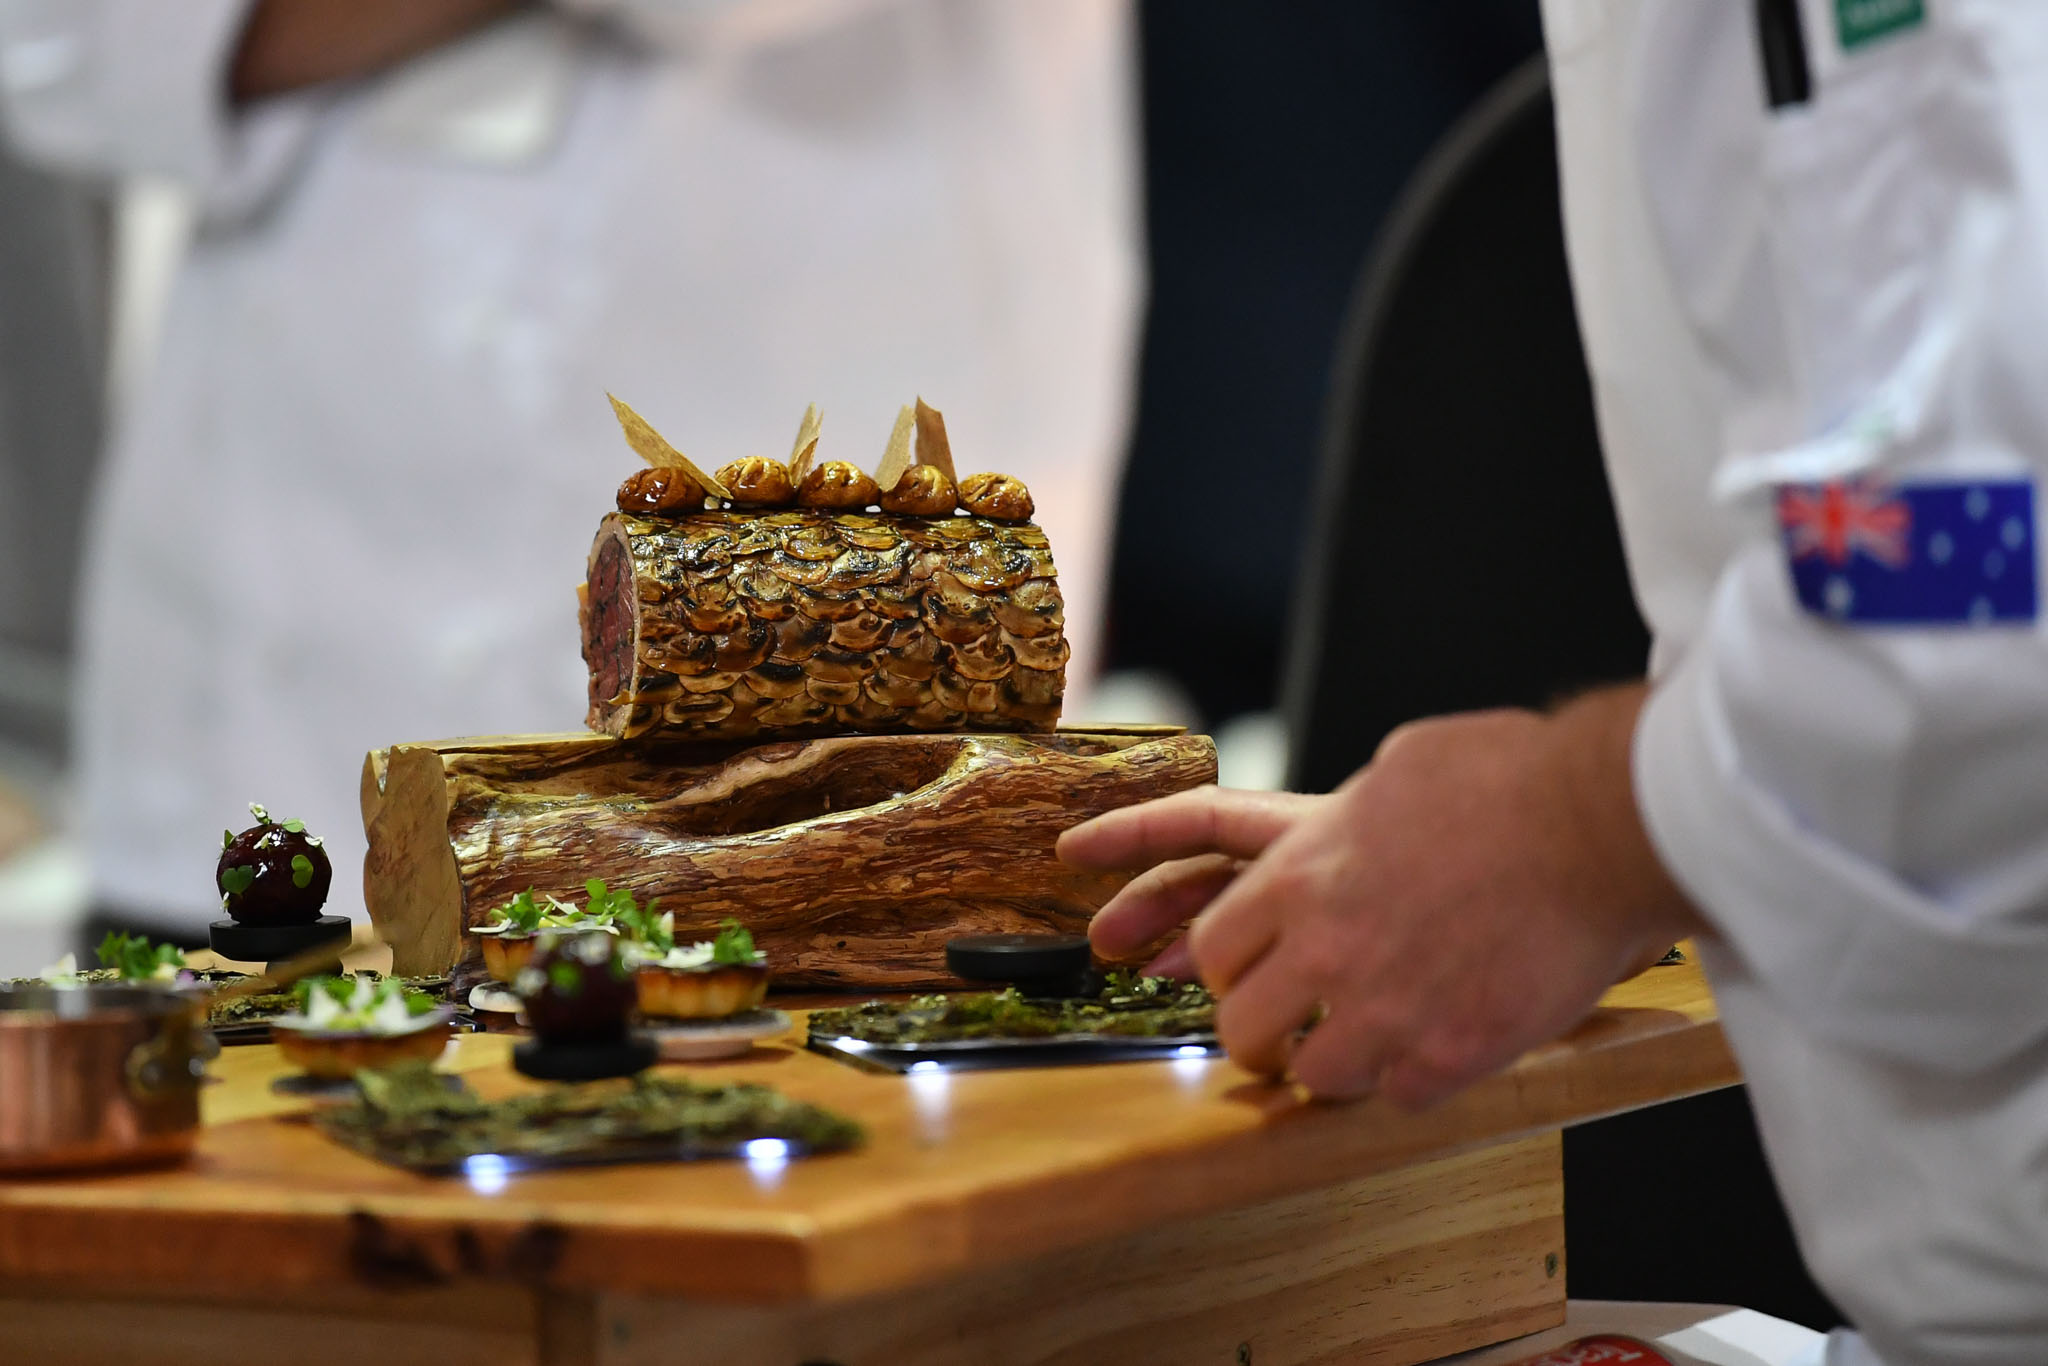 Melbourne, 30 May 2017 - Michael Cole of the Georgie Bass Café & Cookery in Flinders plates up his meat platter at the Australian selection trials of the Bocuse d'Or culinary competition held during the Food Service Australia show at the Royal Exhibition Building in Melbourne, Australia. Photo Sydney Low